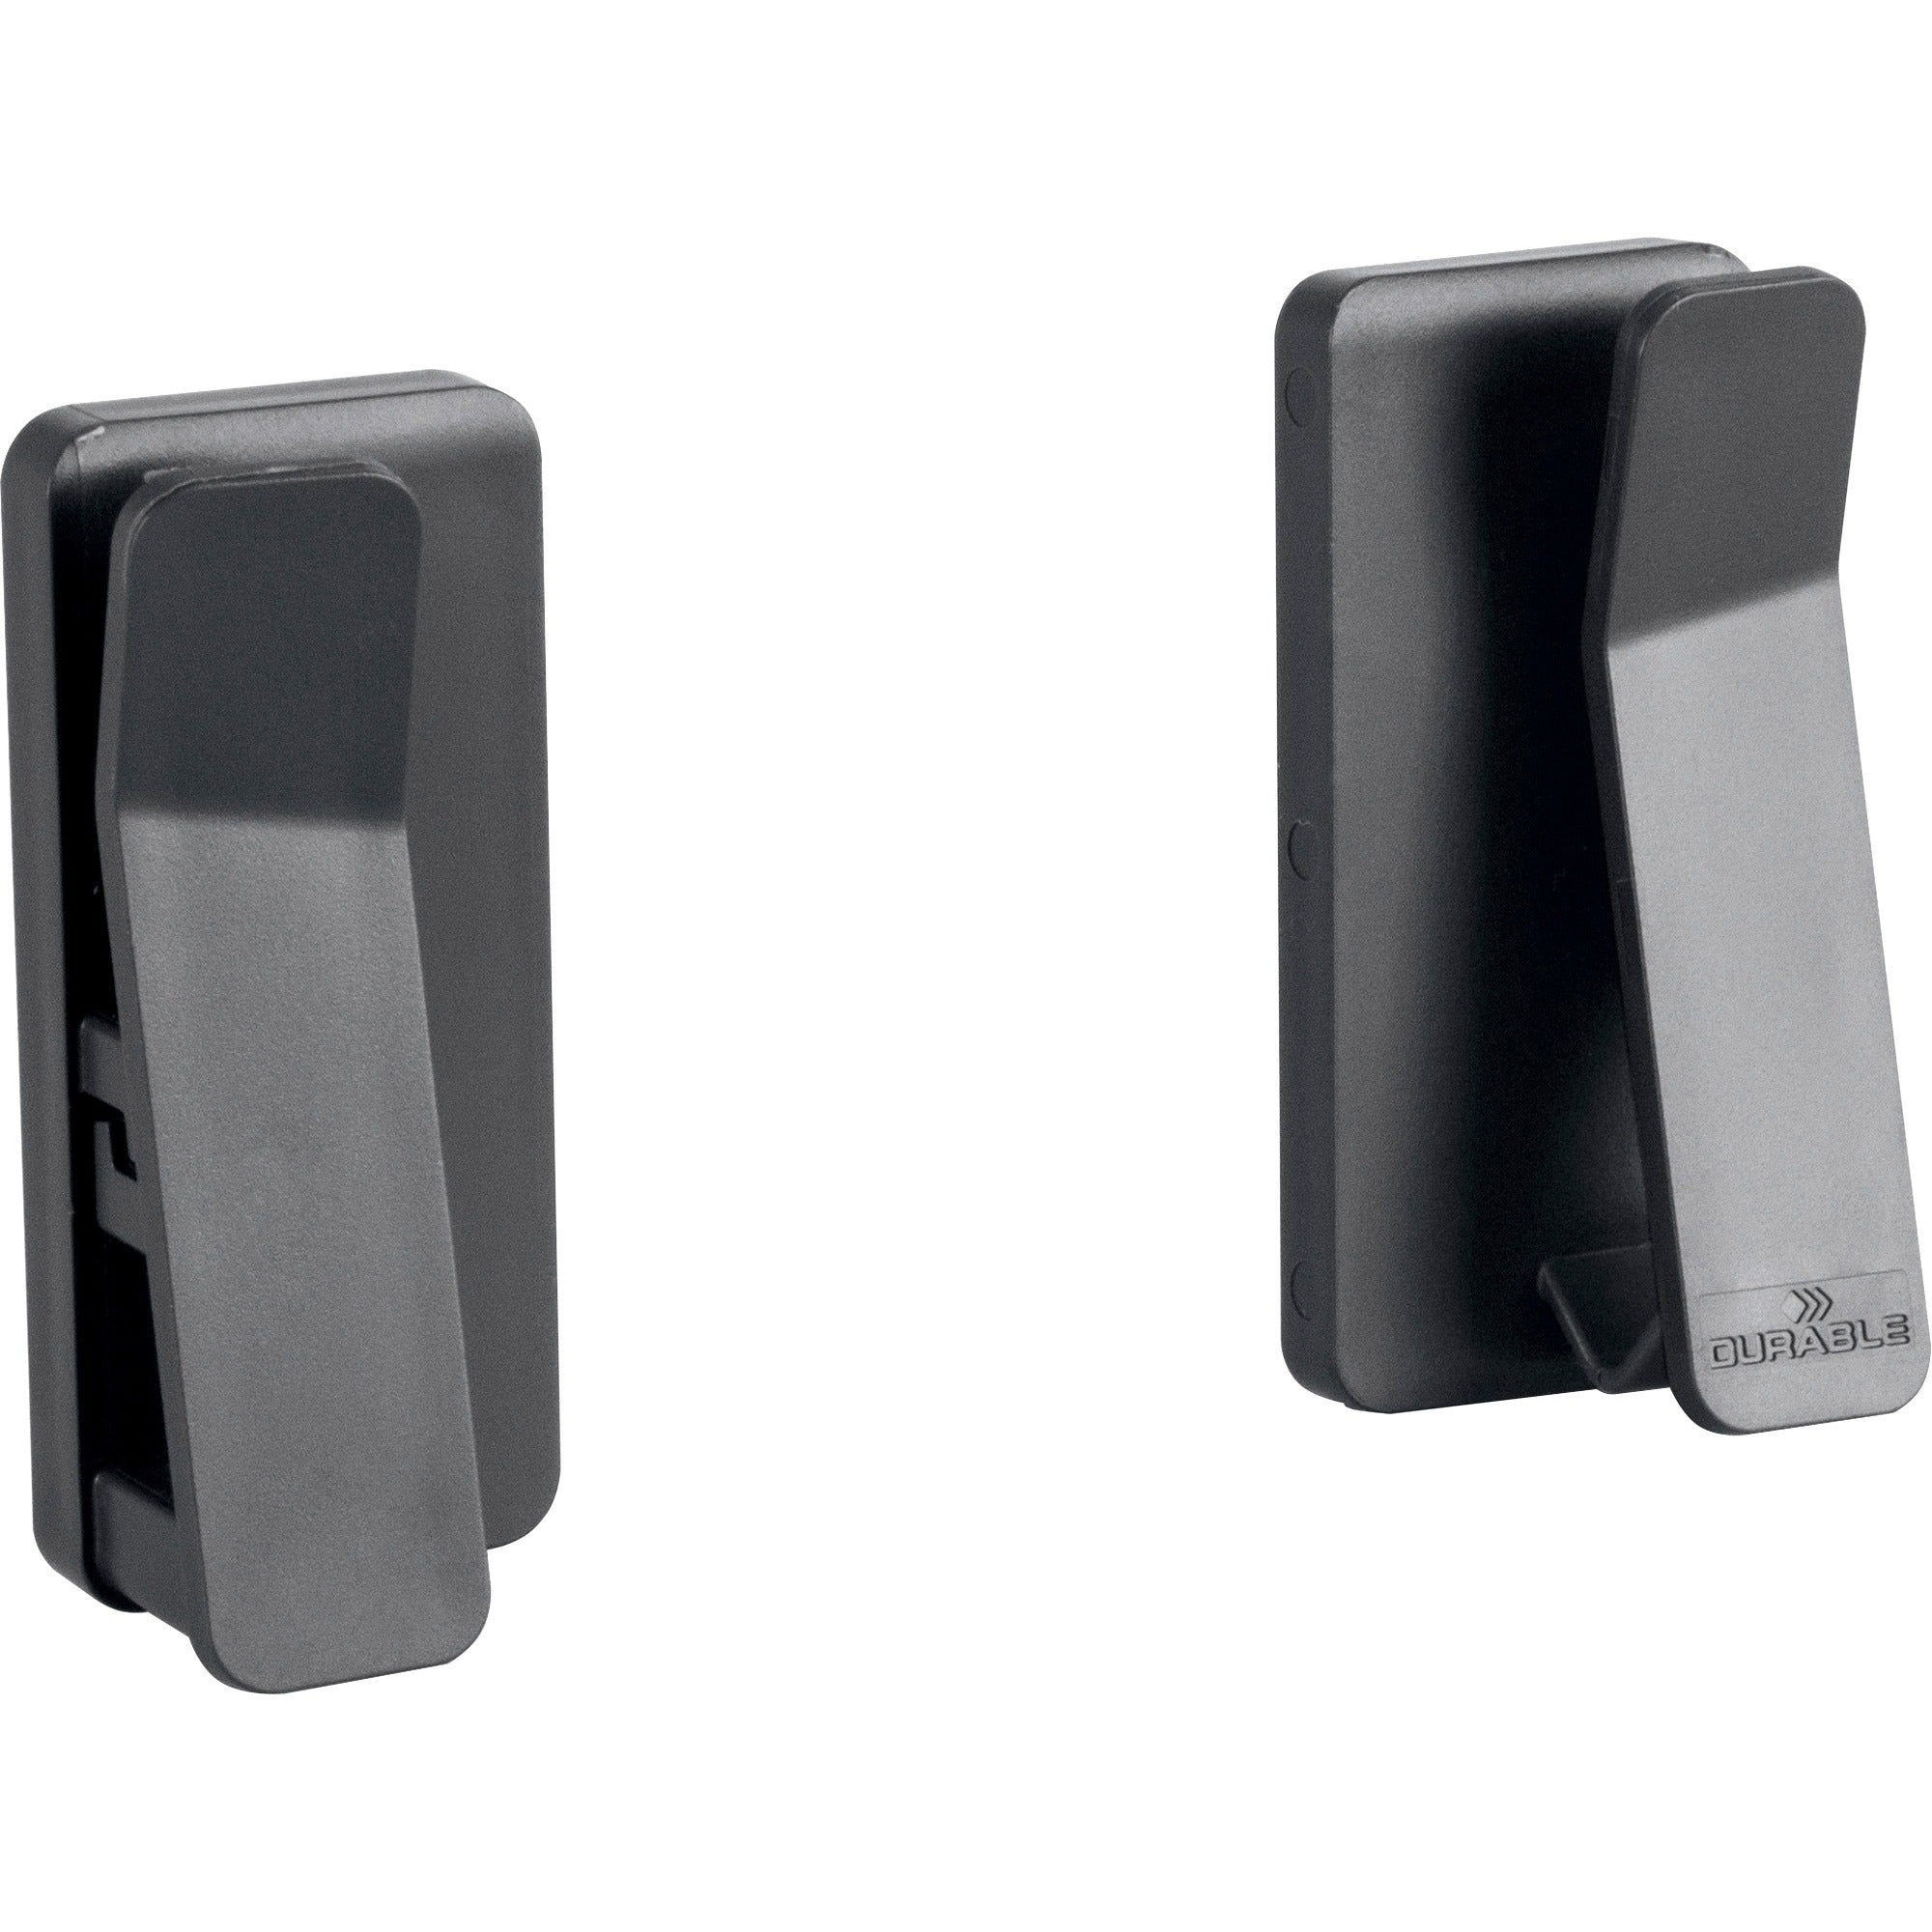 durable-visioclip-wall-mount-for-tablet-smartphone-charcoal-gray-220-lb-load-capacity-1-each_dbl893958 - 3